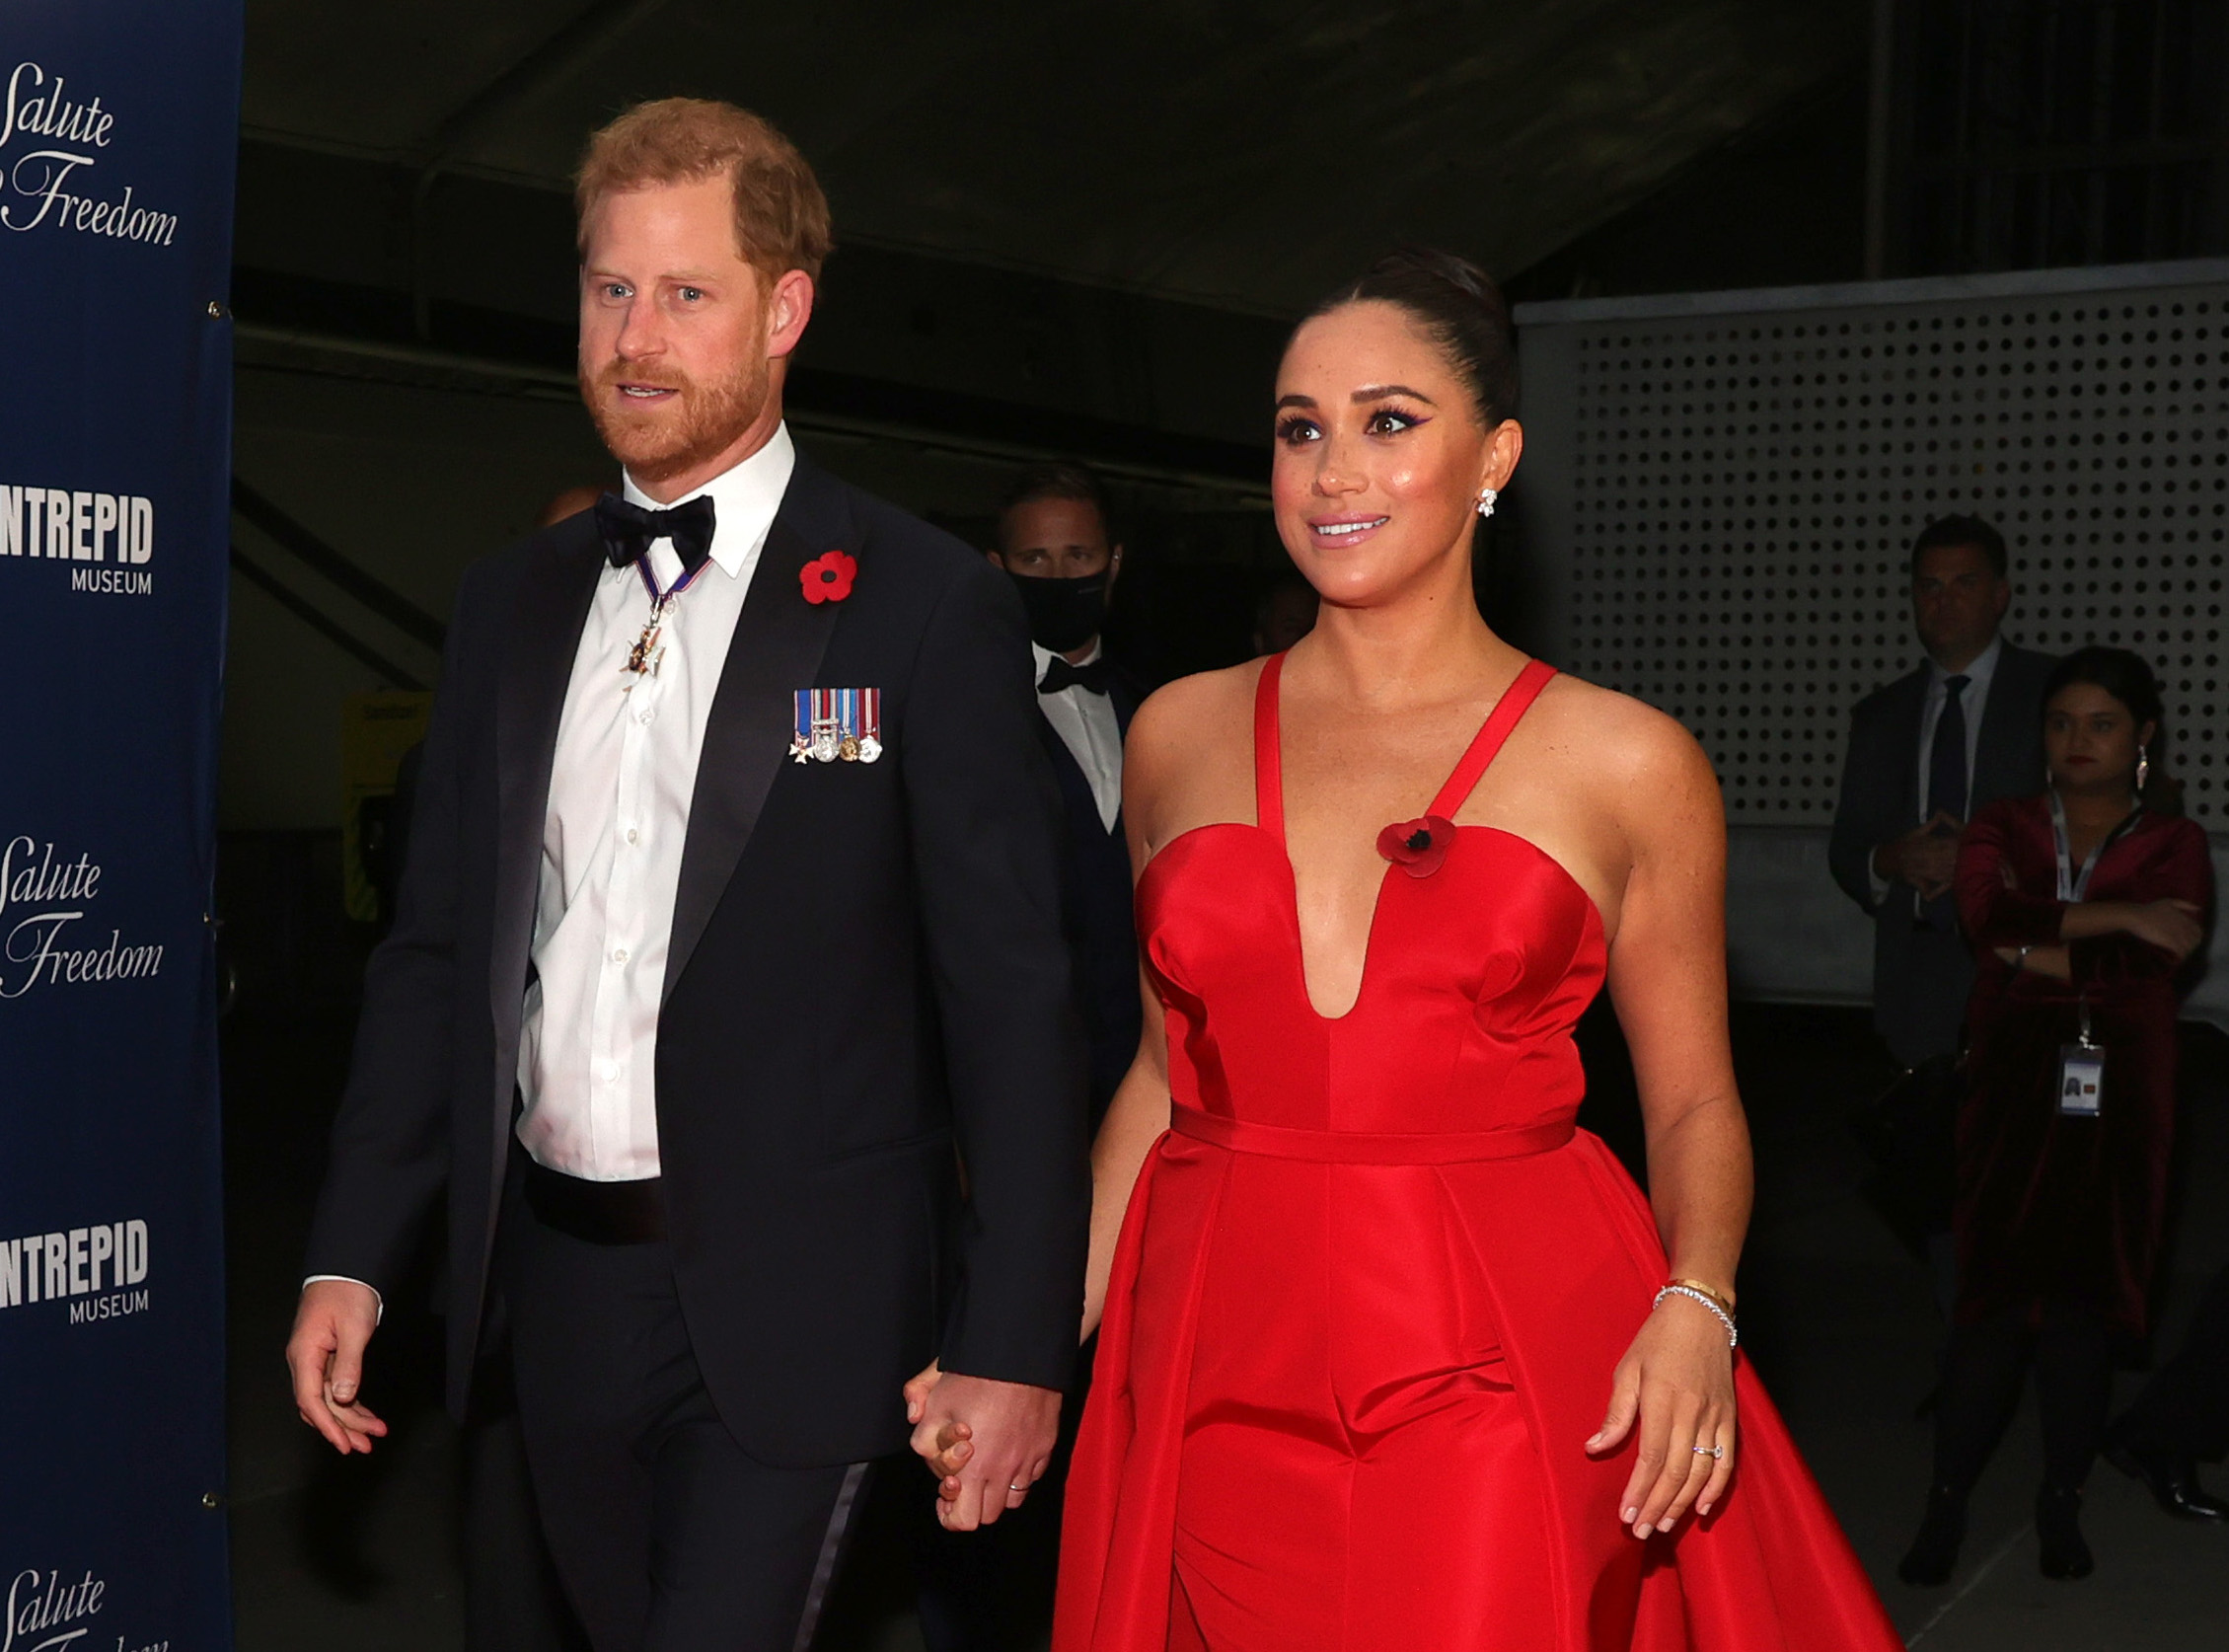 Prince Harry wearing a tuxedo and Meghan Markle in a red gown as they attend the 2021 Salute To Freedom Gala